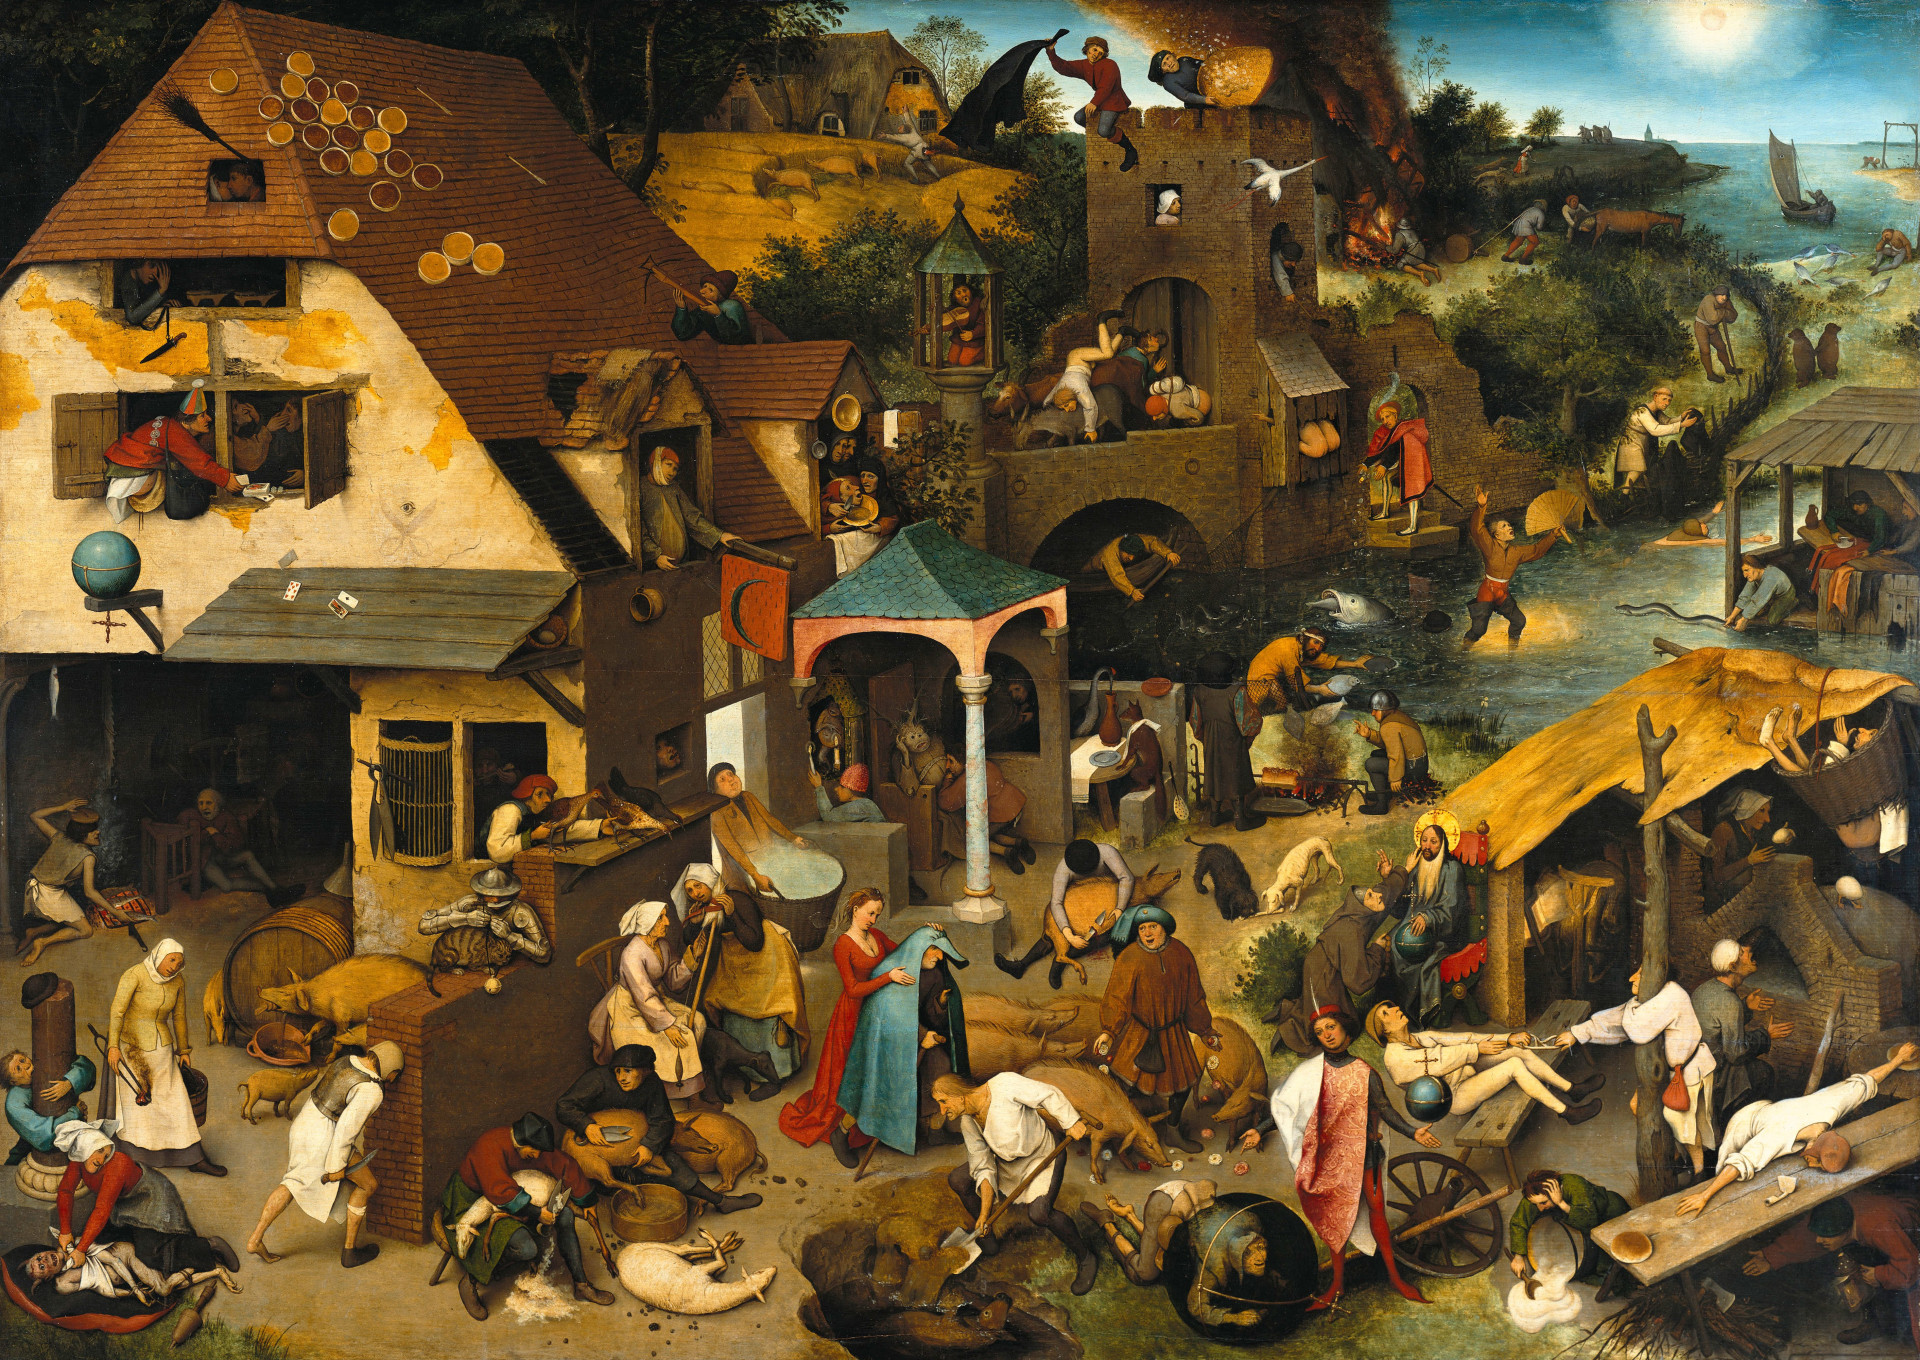 <p>Pieter Bruegel's artwork created in 1559 depicts numerous proverbs and is approximated to encompass roughly 100 of them.</p><p>You may also like:<a href="https://www.starsinsider.com/n/288152?utm_source=msn.com&utm_medium=display&utm_campaign=referral_description&utm_content=622678v1en-en"> 58 things you cannot do while pregnant</a></p>